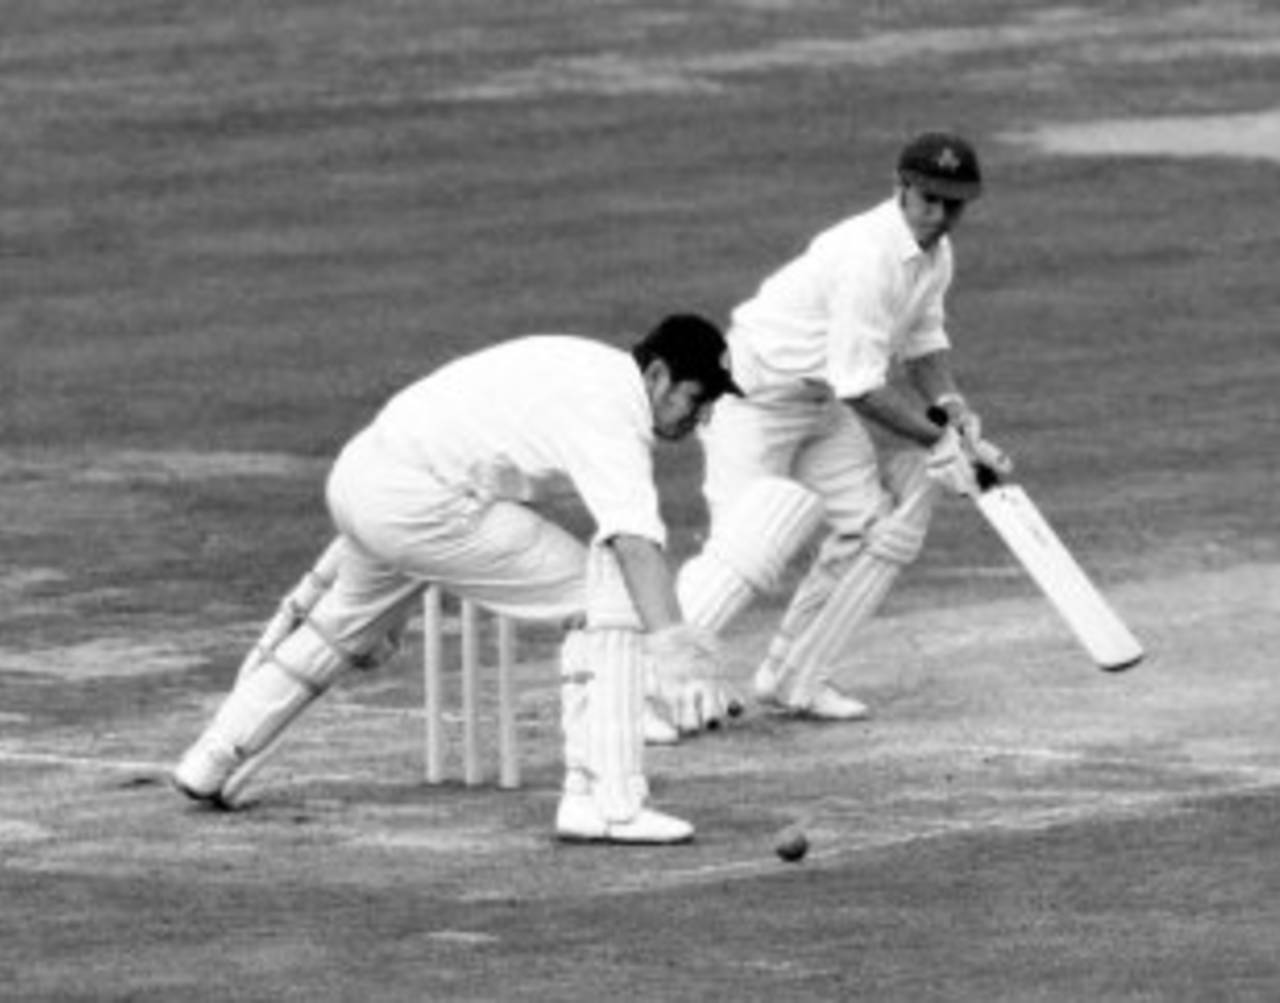 Harry Pilling on his way to an unbeaten 70 in the 1970 Gillette Cup final, the first of three titles in as many years for Pilling and the county&nbsp;&nbsp;&bull;&nbsp;&nbsp;PA Photos